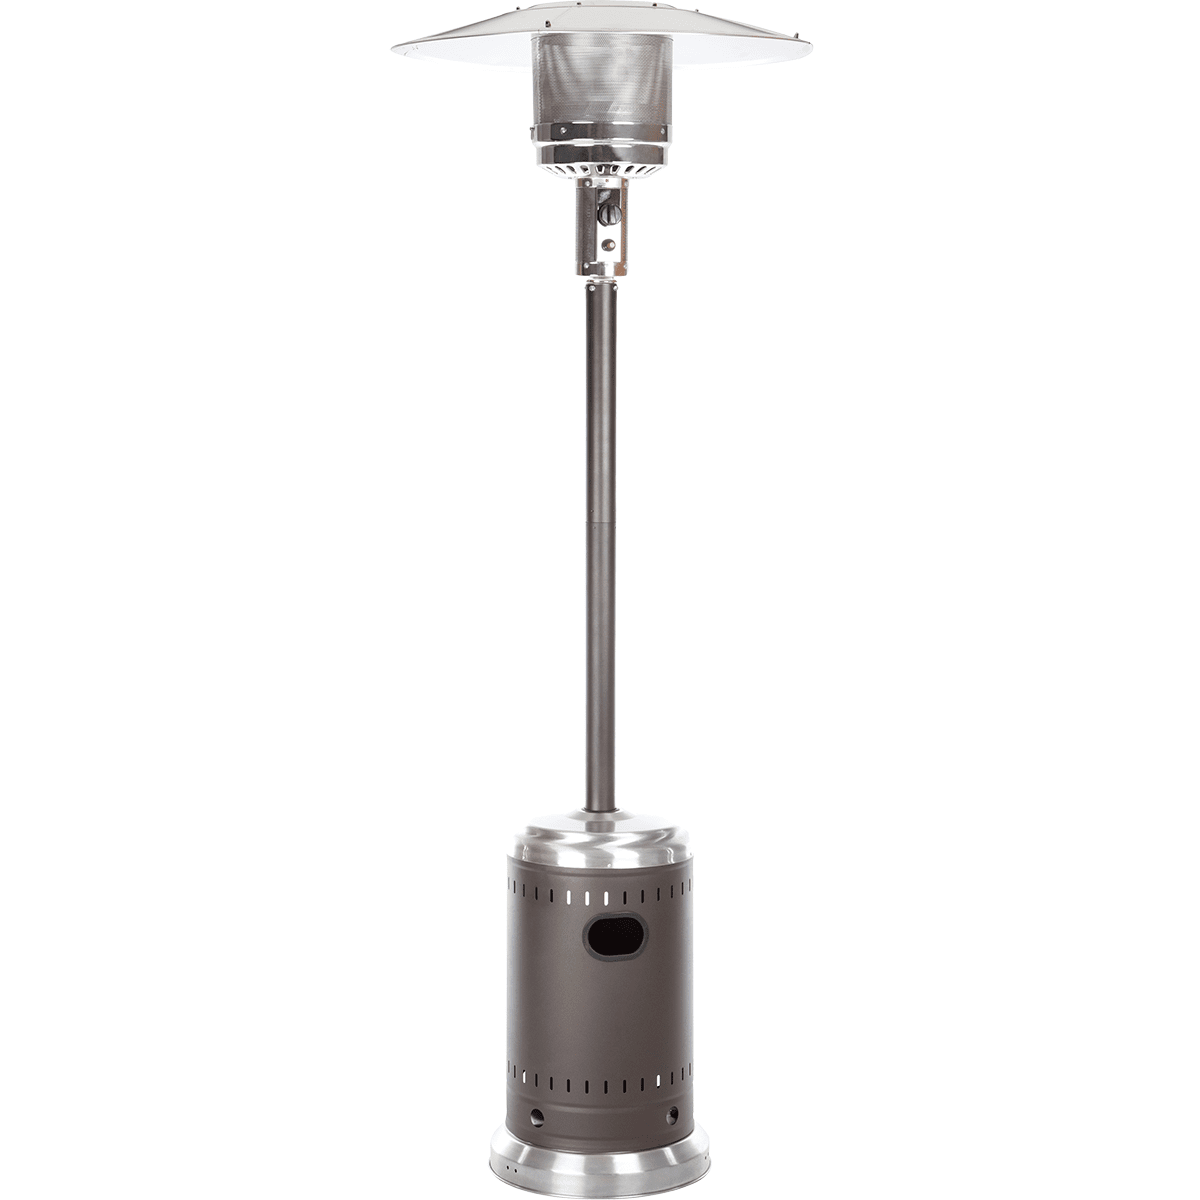 Fire Sense Commercial Patio Heater Mocha And Stainless Steel Finish (61185)